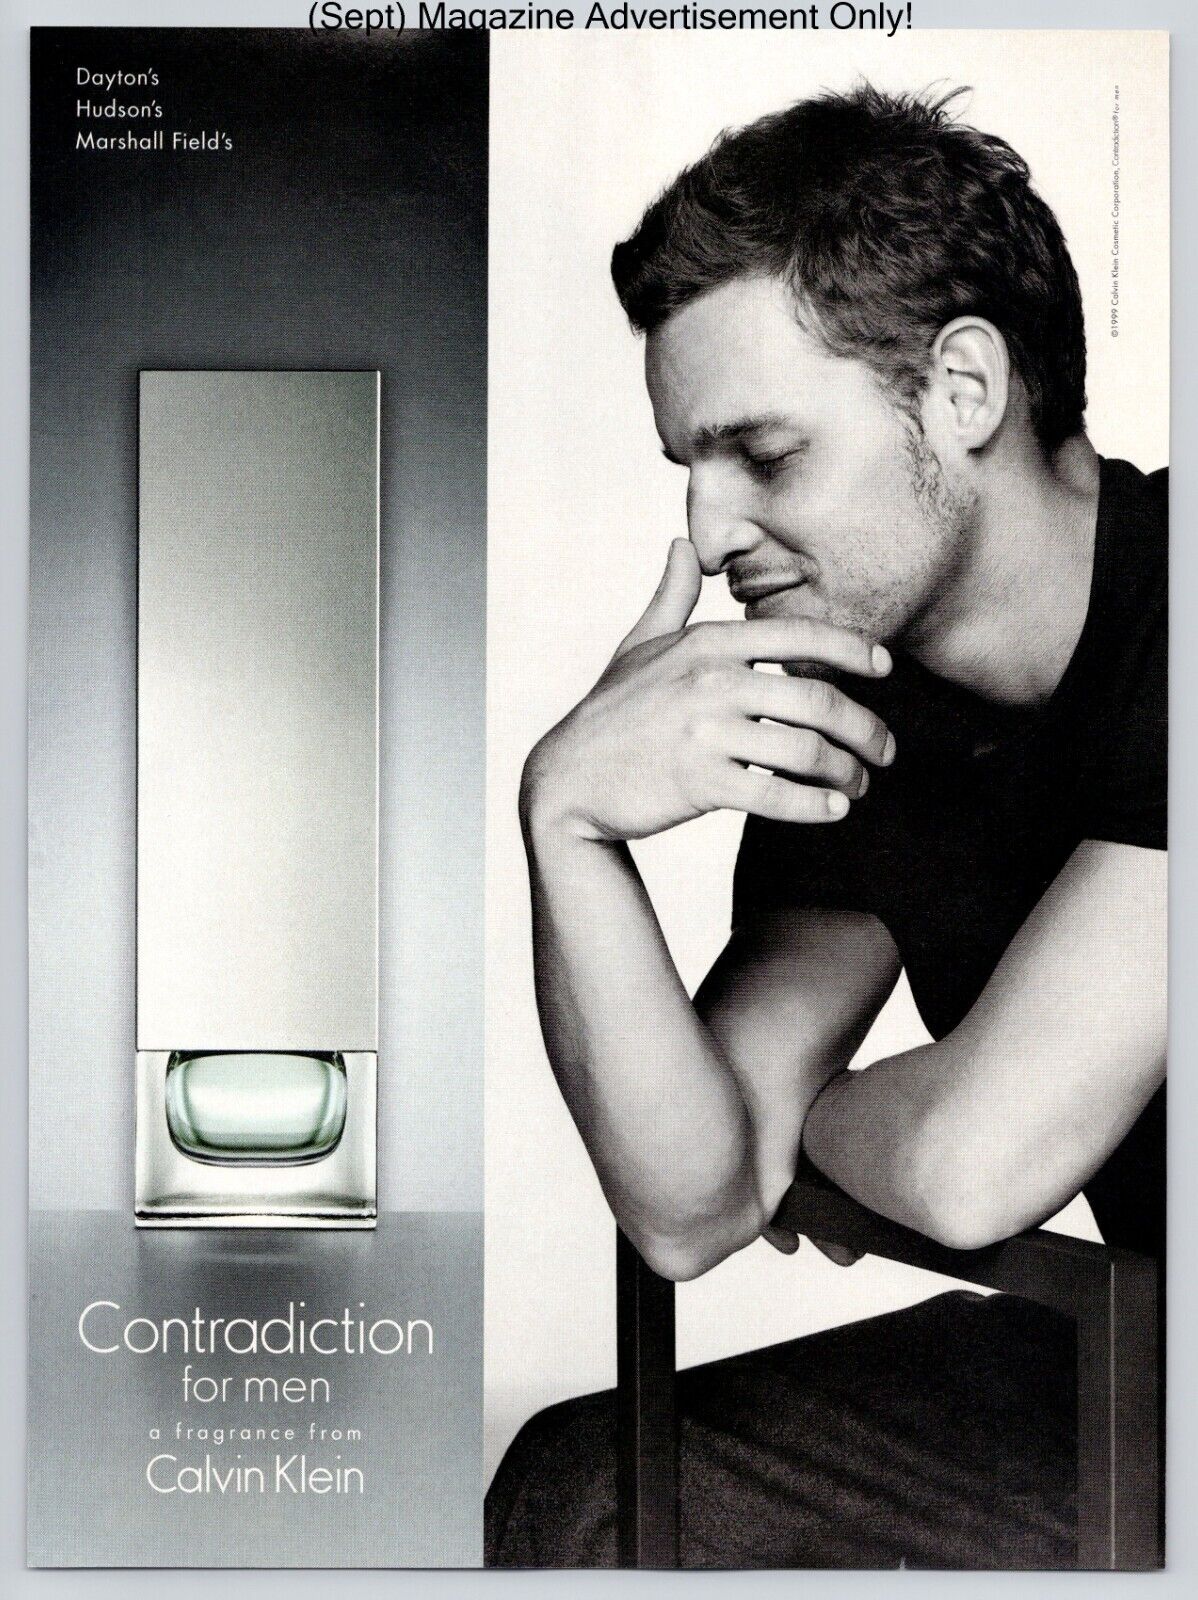 Justin Chambers Contradiction CK Fragrance Promo 1999 Full Page Print Ad